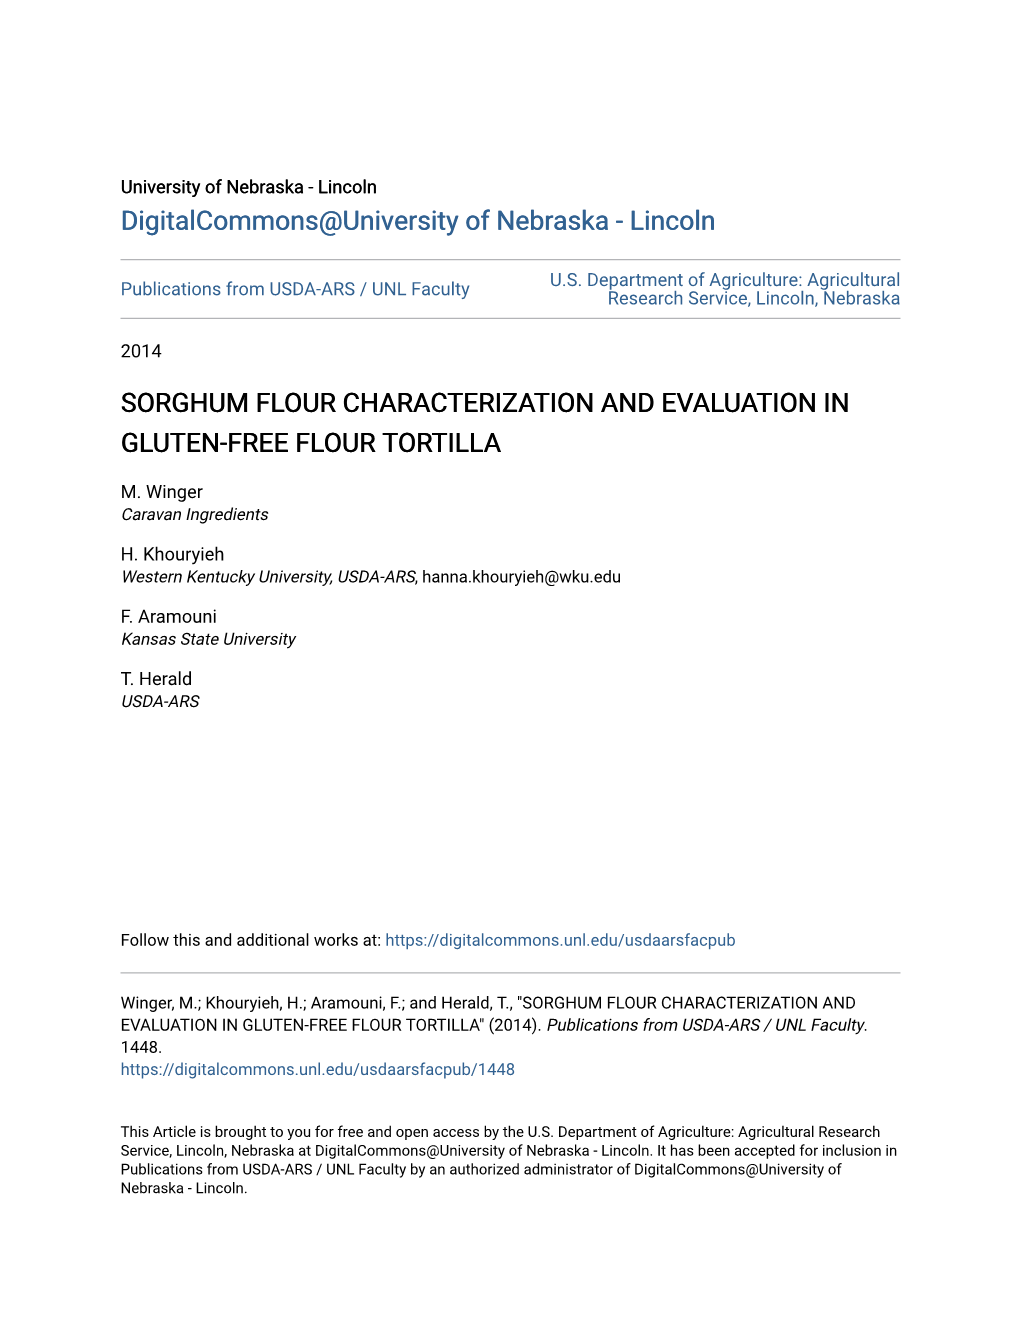 Sorghum Flour Characterization and Evaluation in Gluten-Free Flour Tortilla